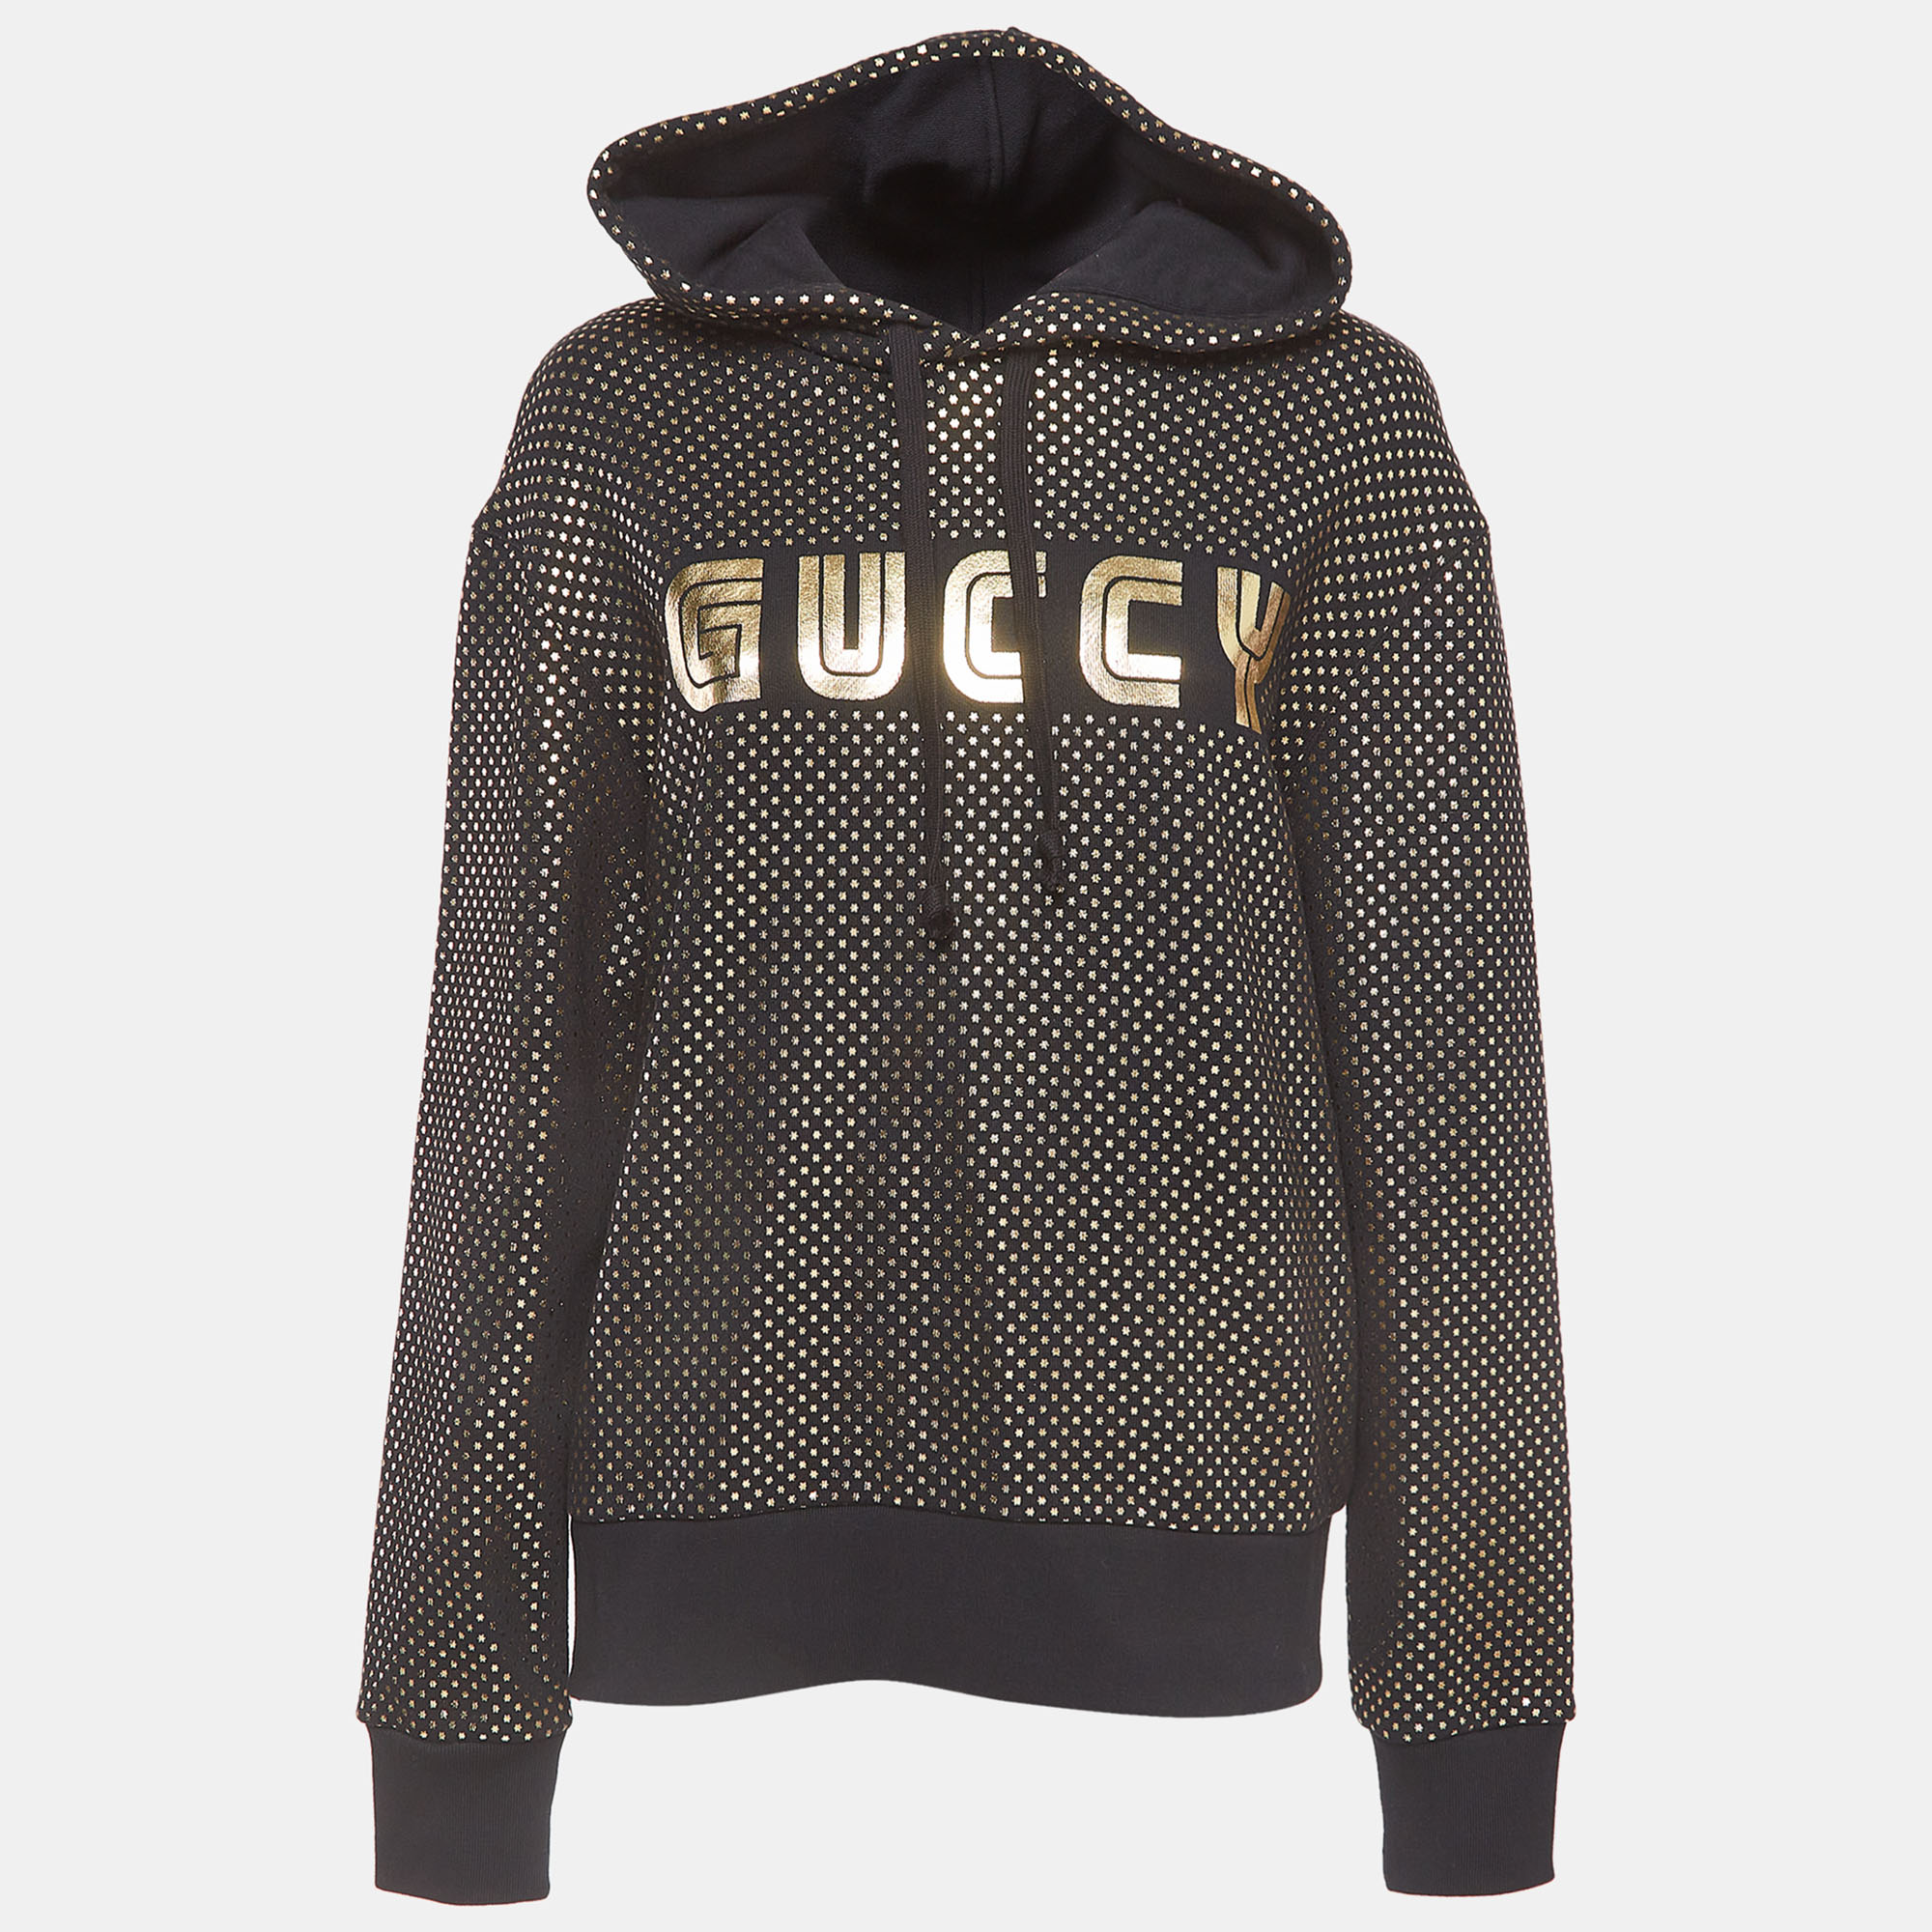 This Gucci hoodie is all about sporting a classy and comfy style. It is tailored from soft fabric which is highlighted with signature accents.